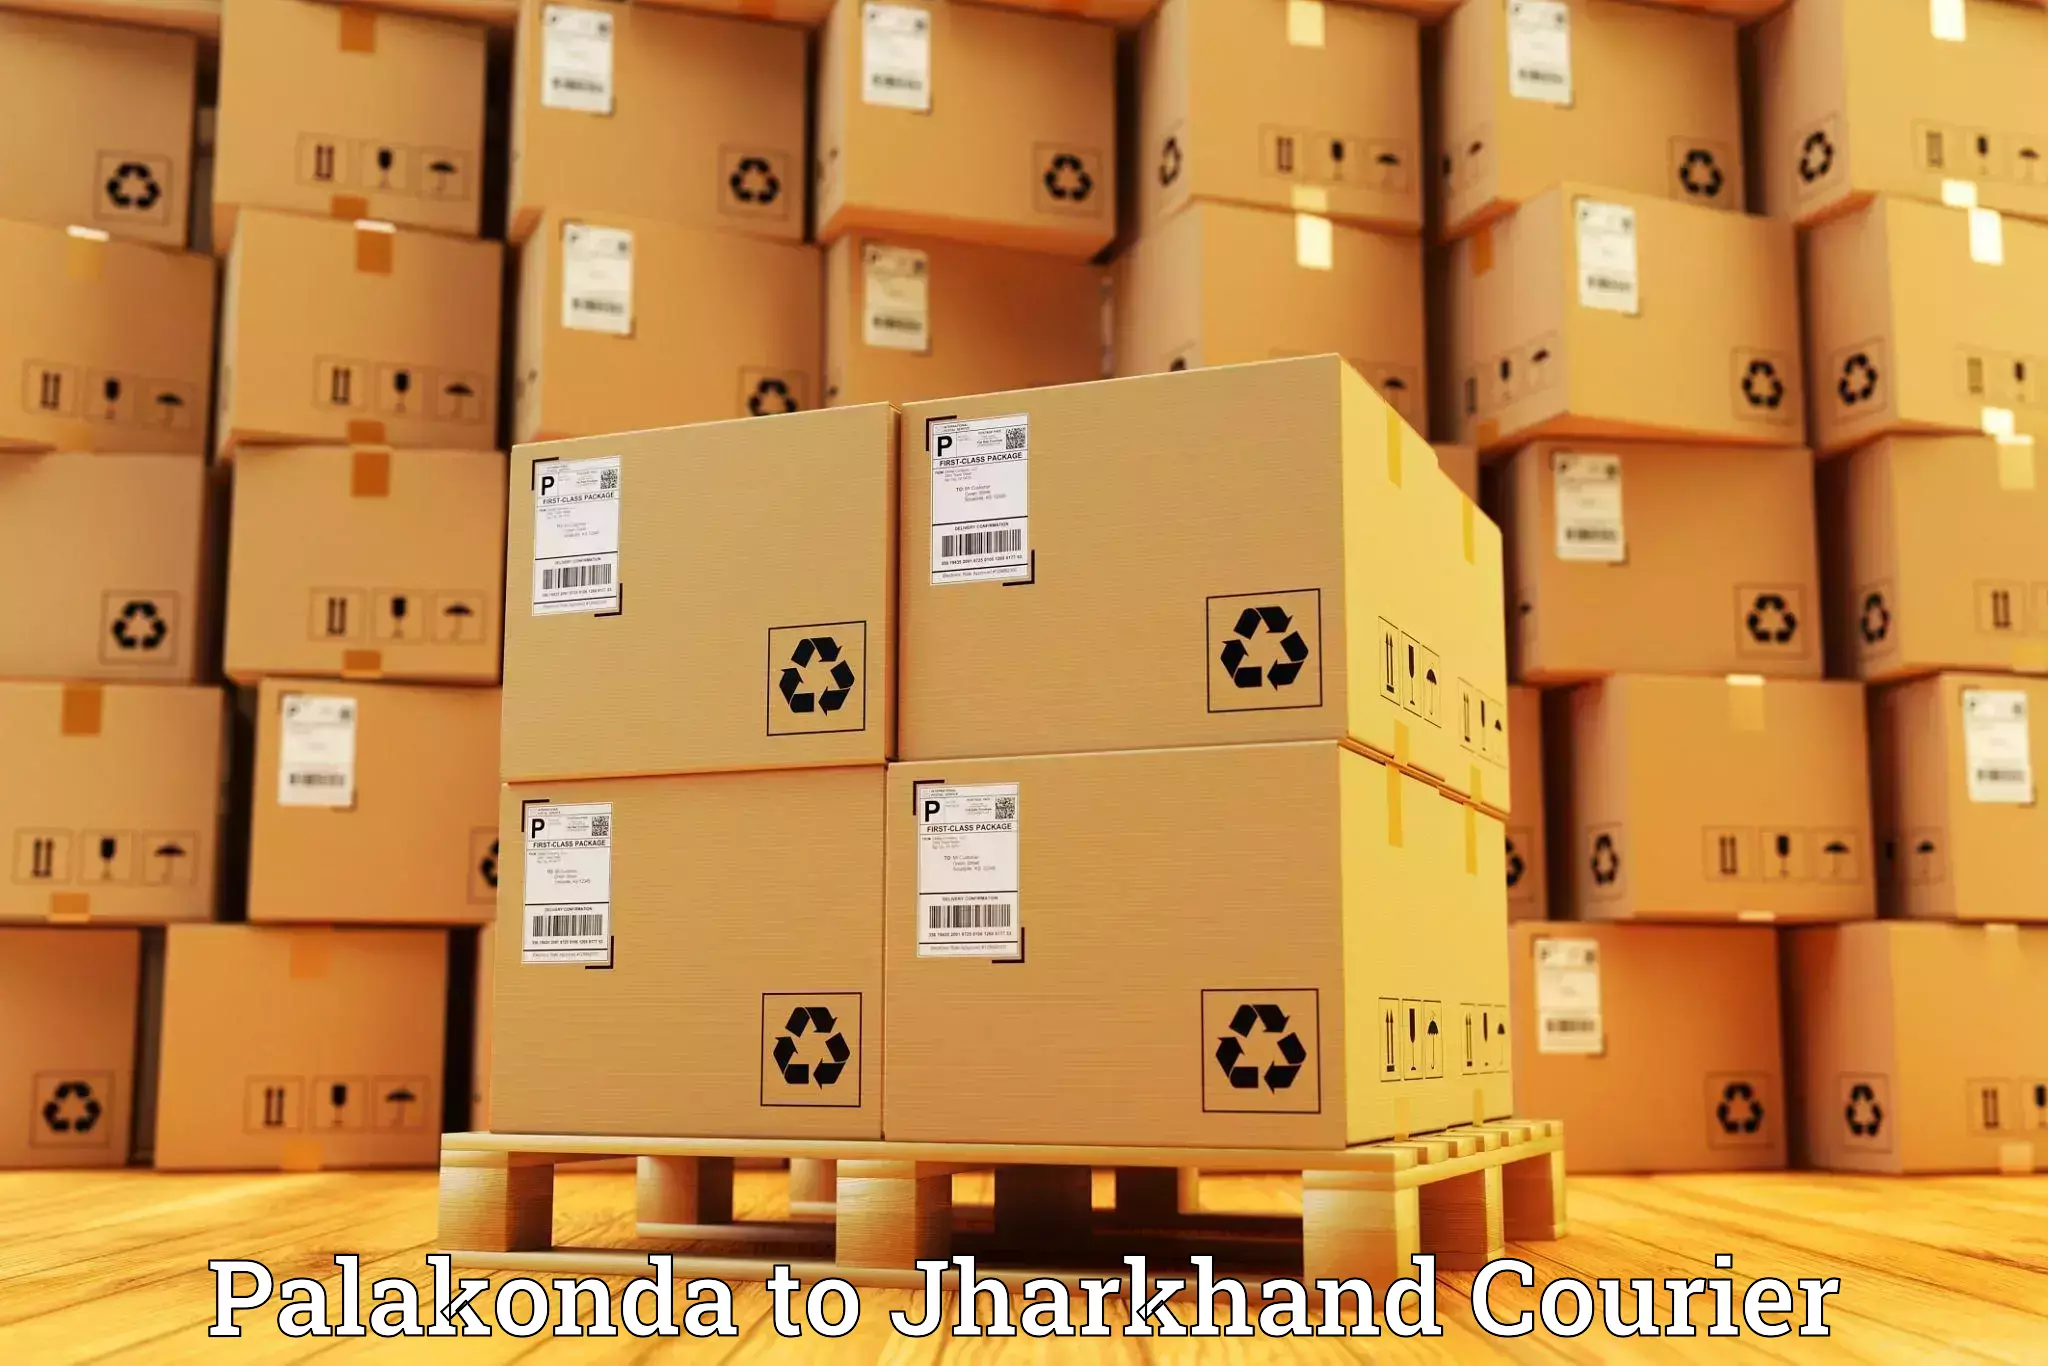 Premium courier services in Palakonda to Chandil